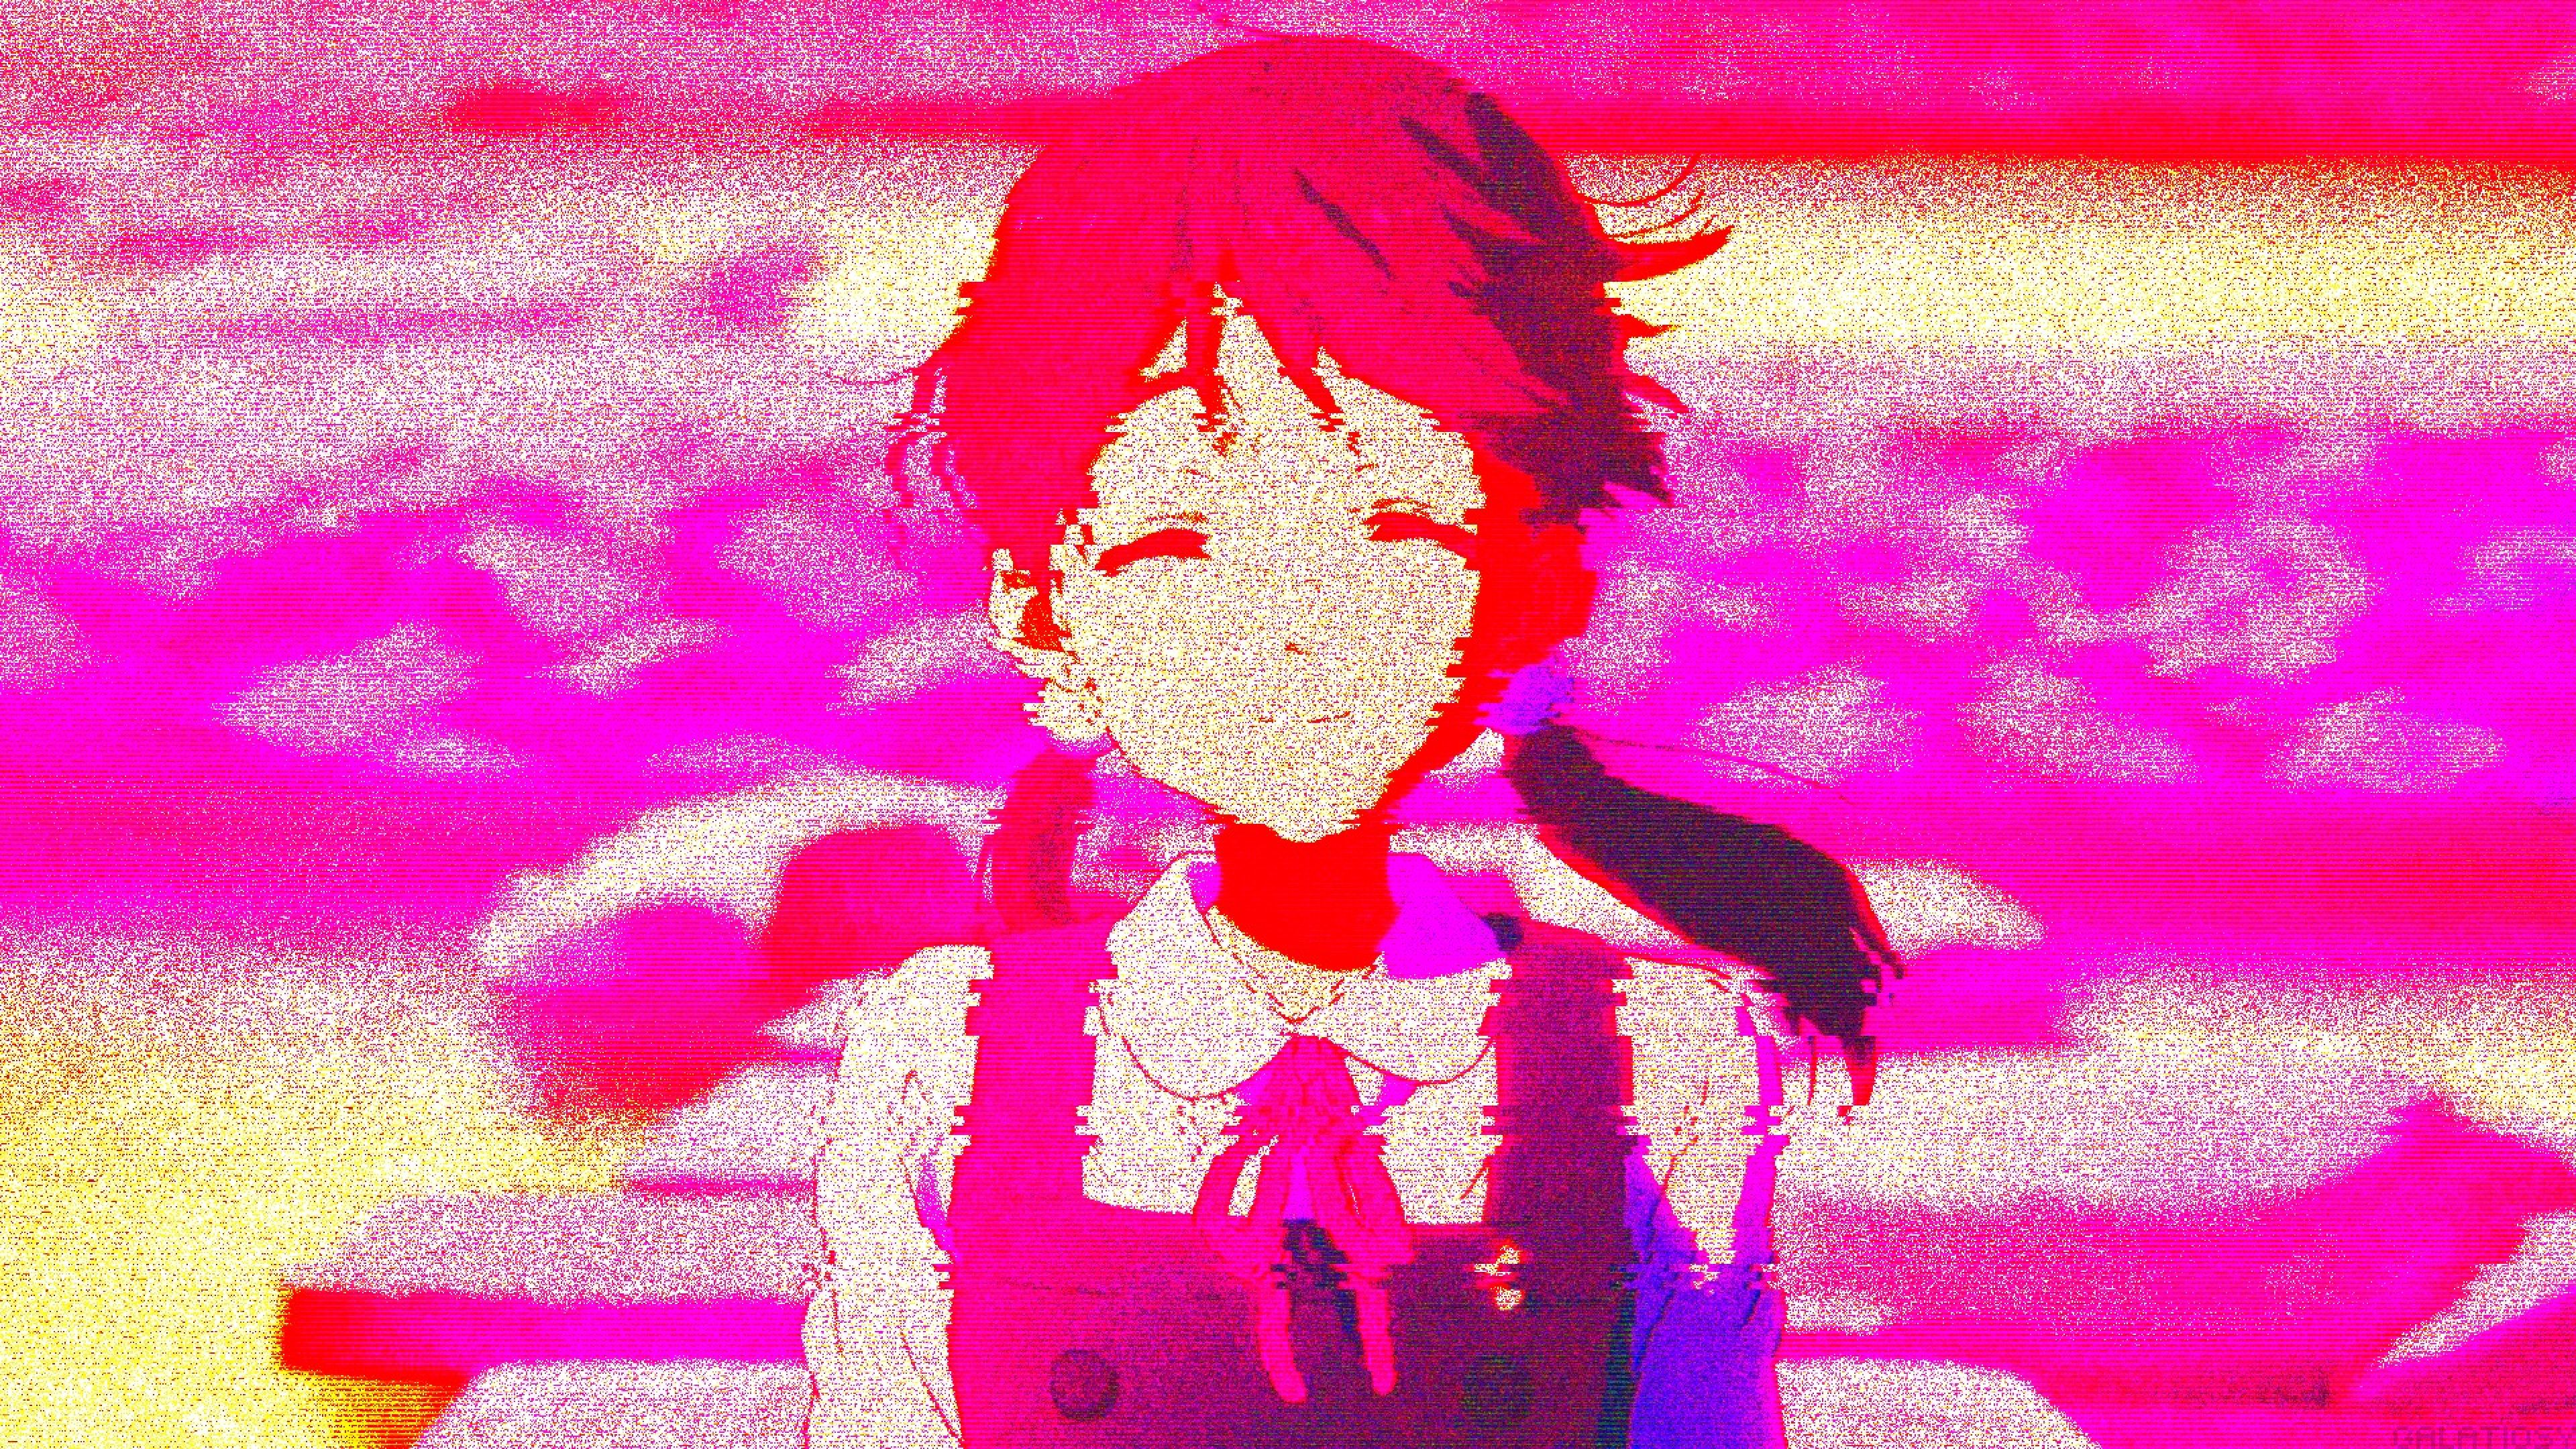 A girl in anime style is standing on the sidewalk - Anime girl, glitch